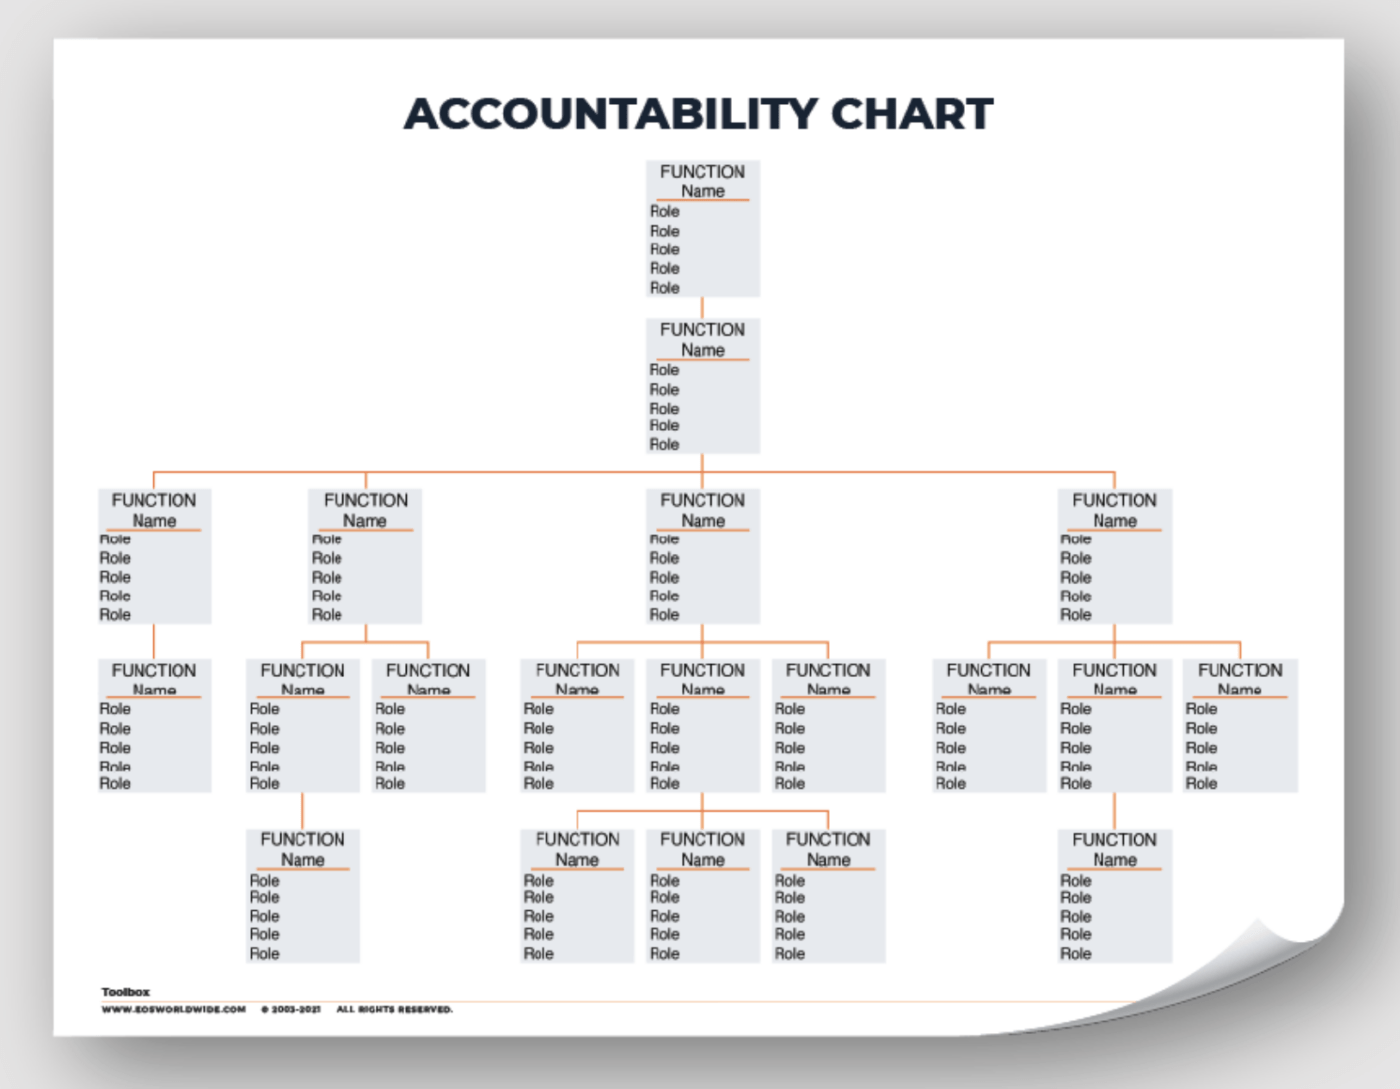 Structure your organization in a way that not only reduces complexity and creates accountability but also clearly defines everyone’s roles and helps get you to the next level with the Accountability Chart from  EOS Worldwide